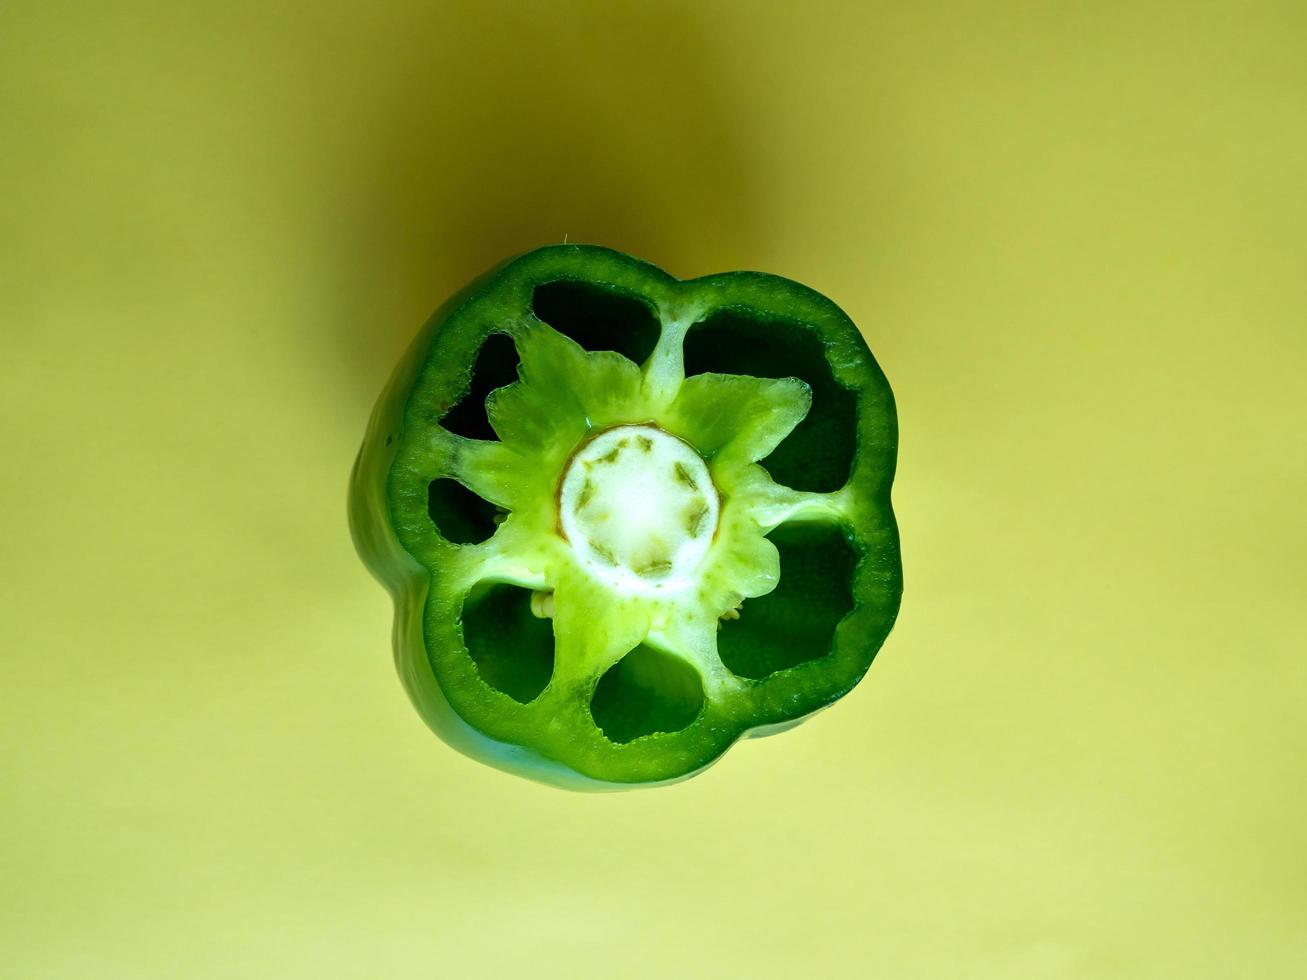 Green bell pepper on a green background photo